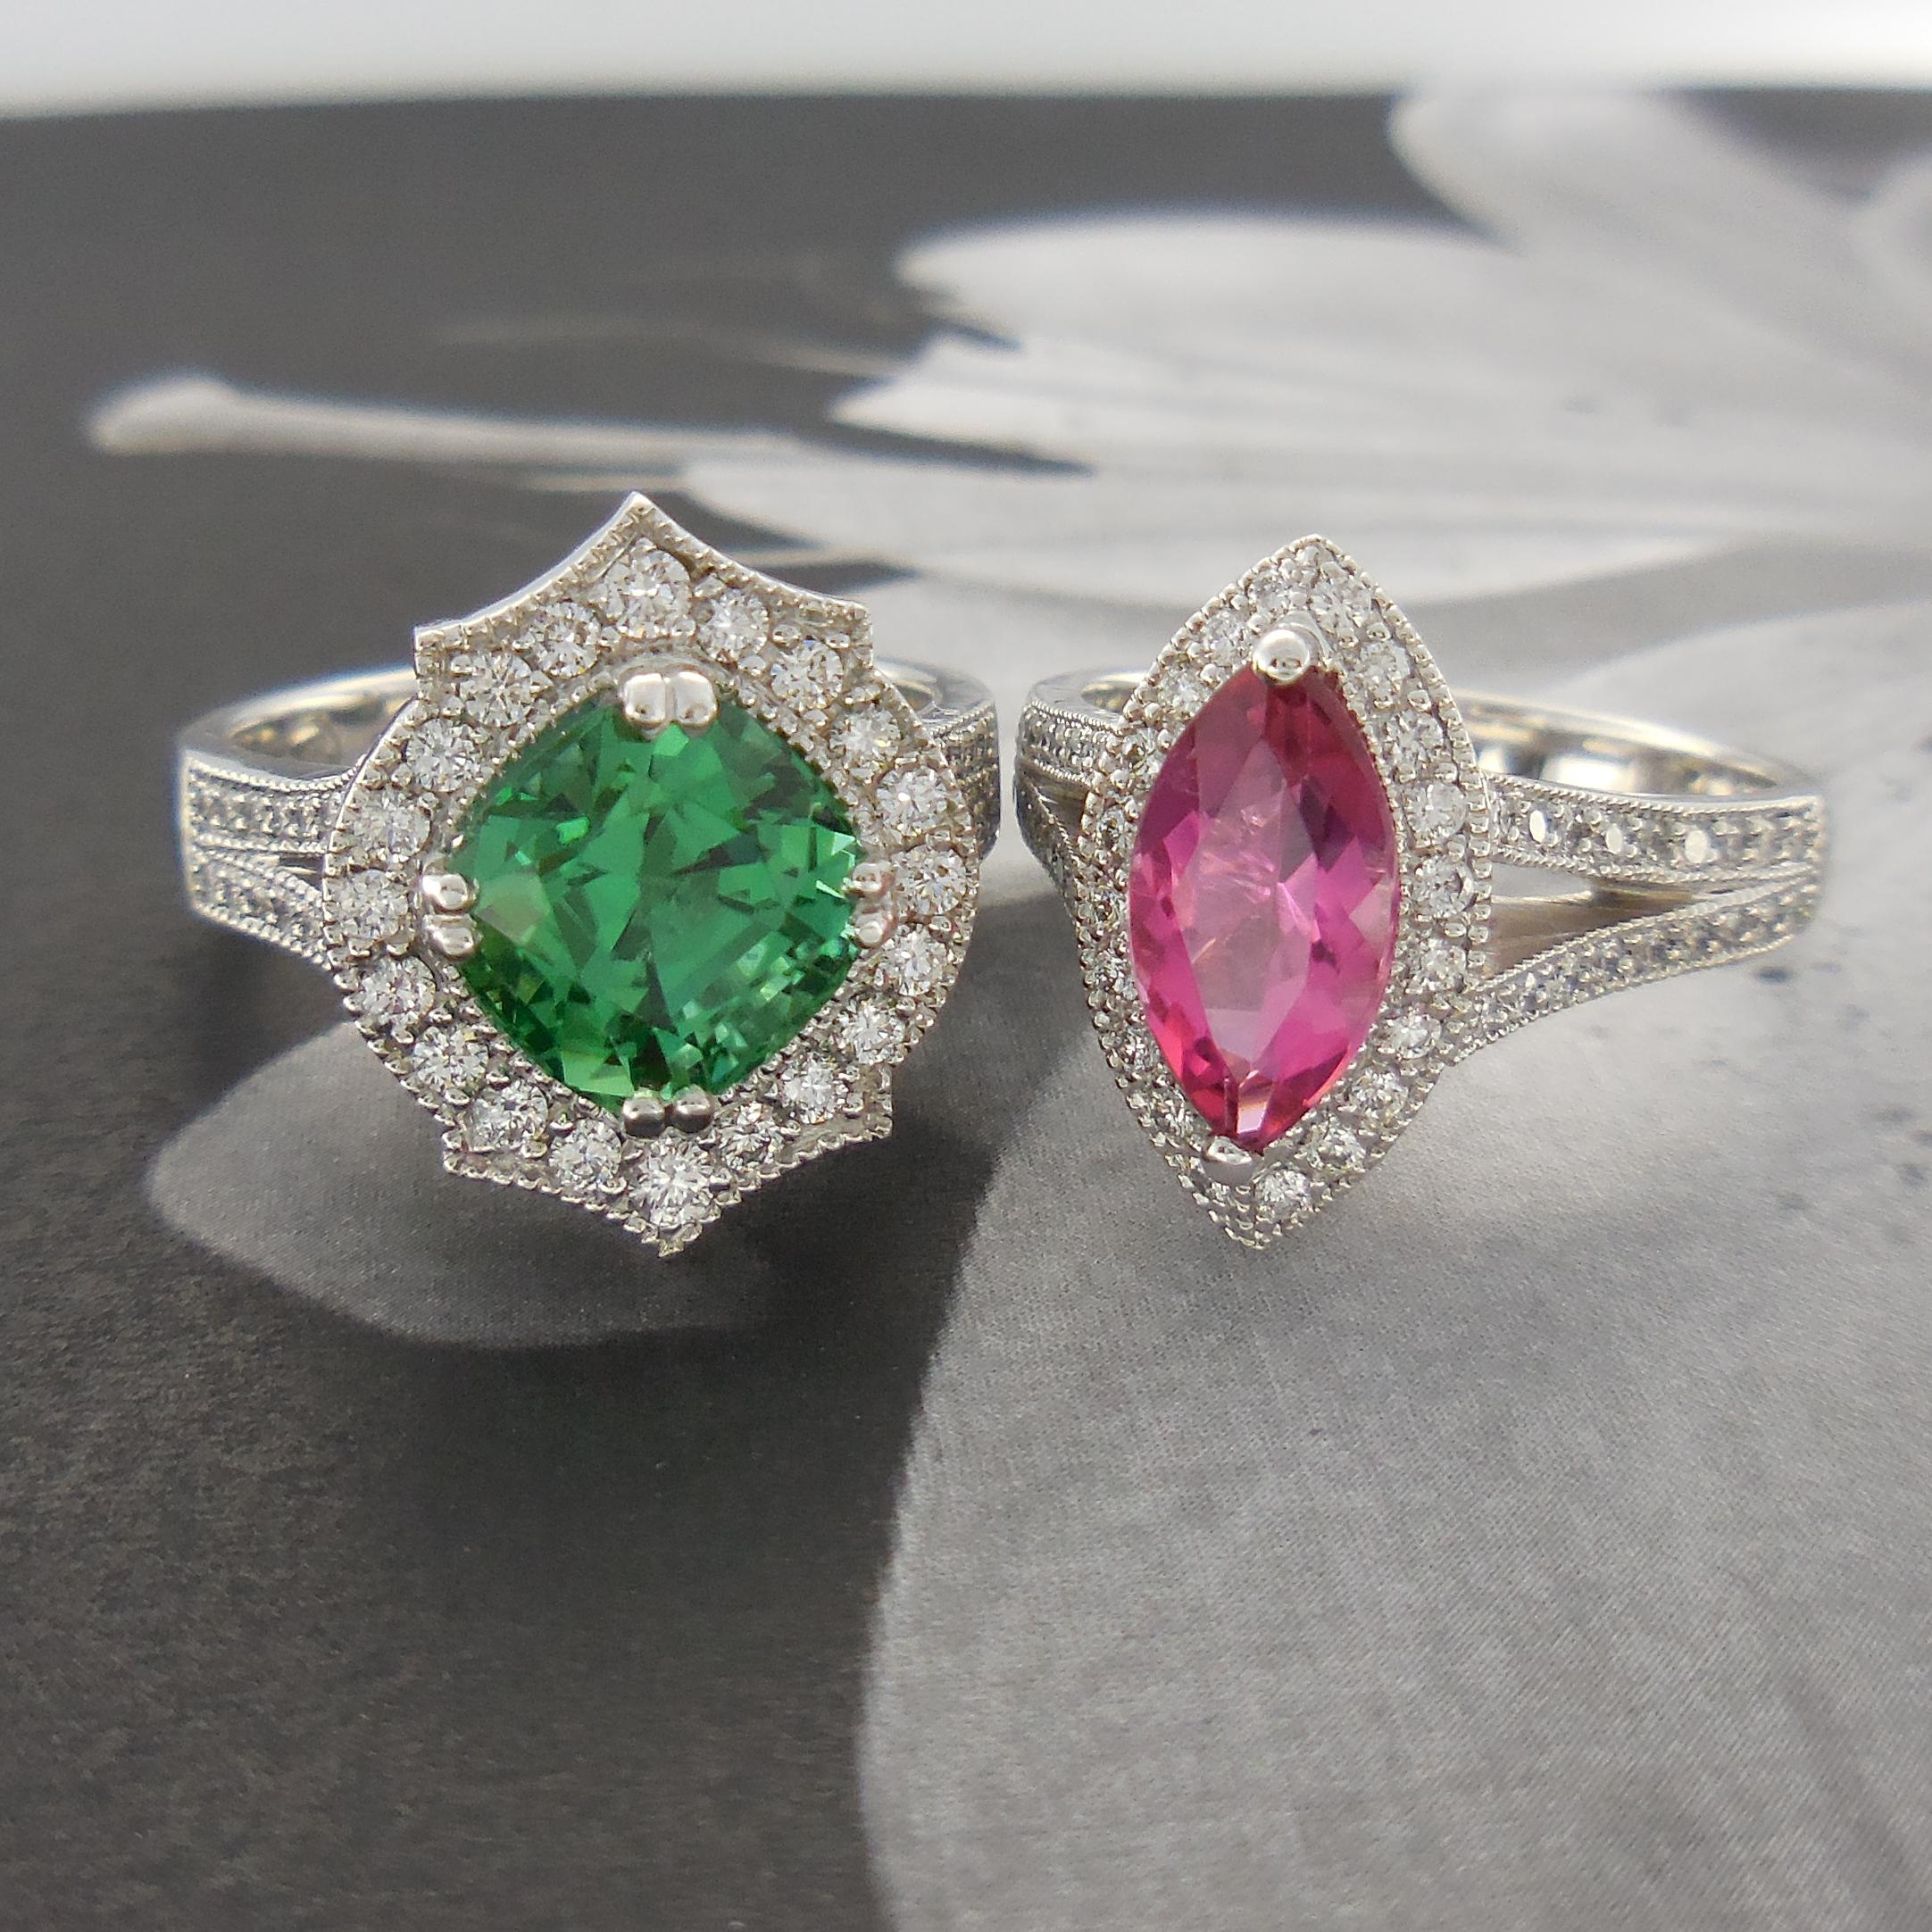 Contemporary 1.22 Carat Pink Tourmaline Marquise Diamond Cluster Ring Natalie Barney For Sale